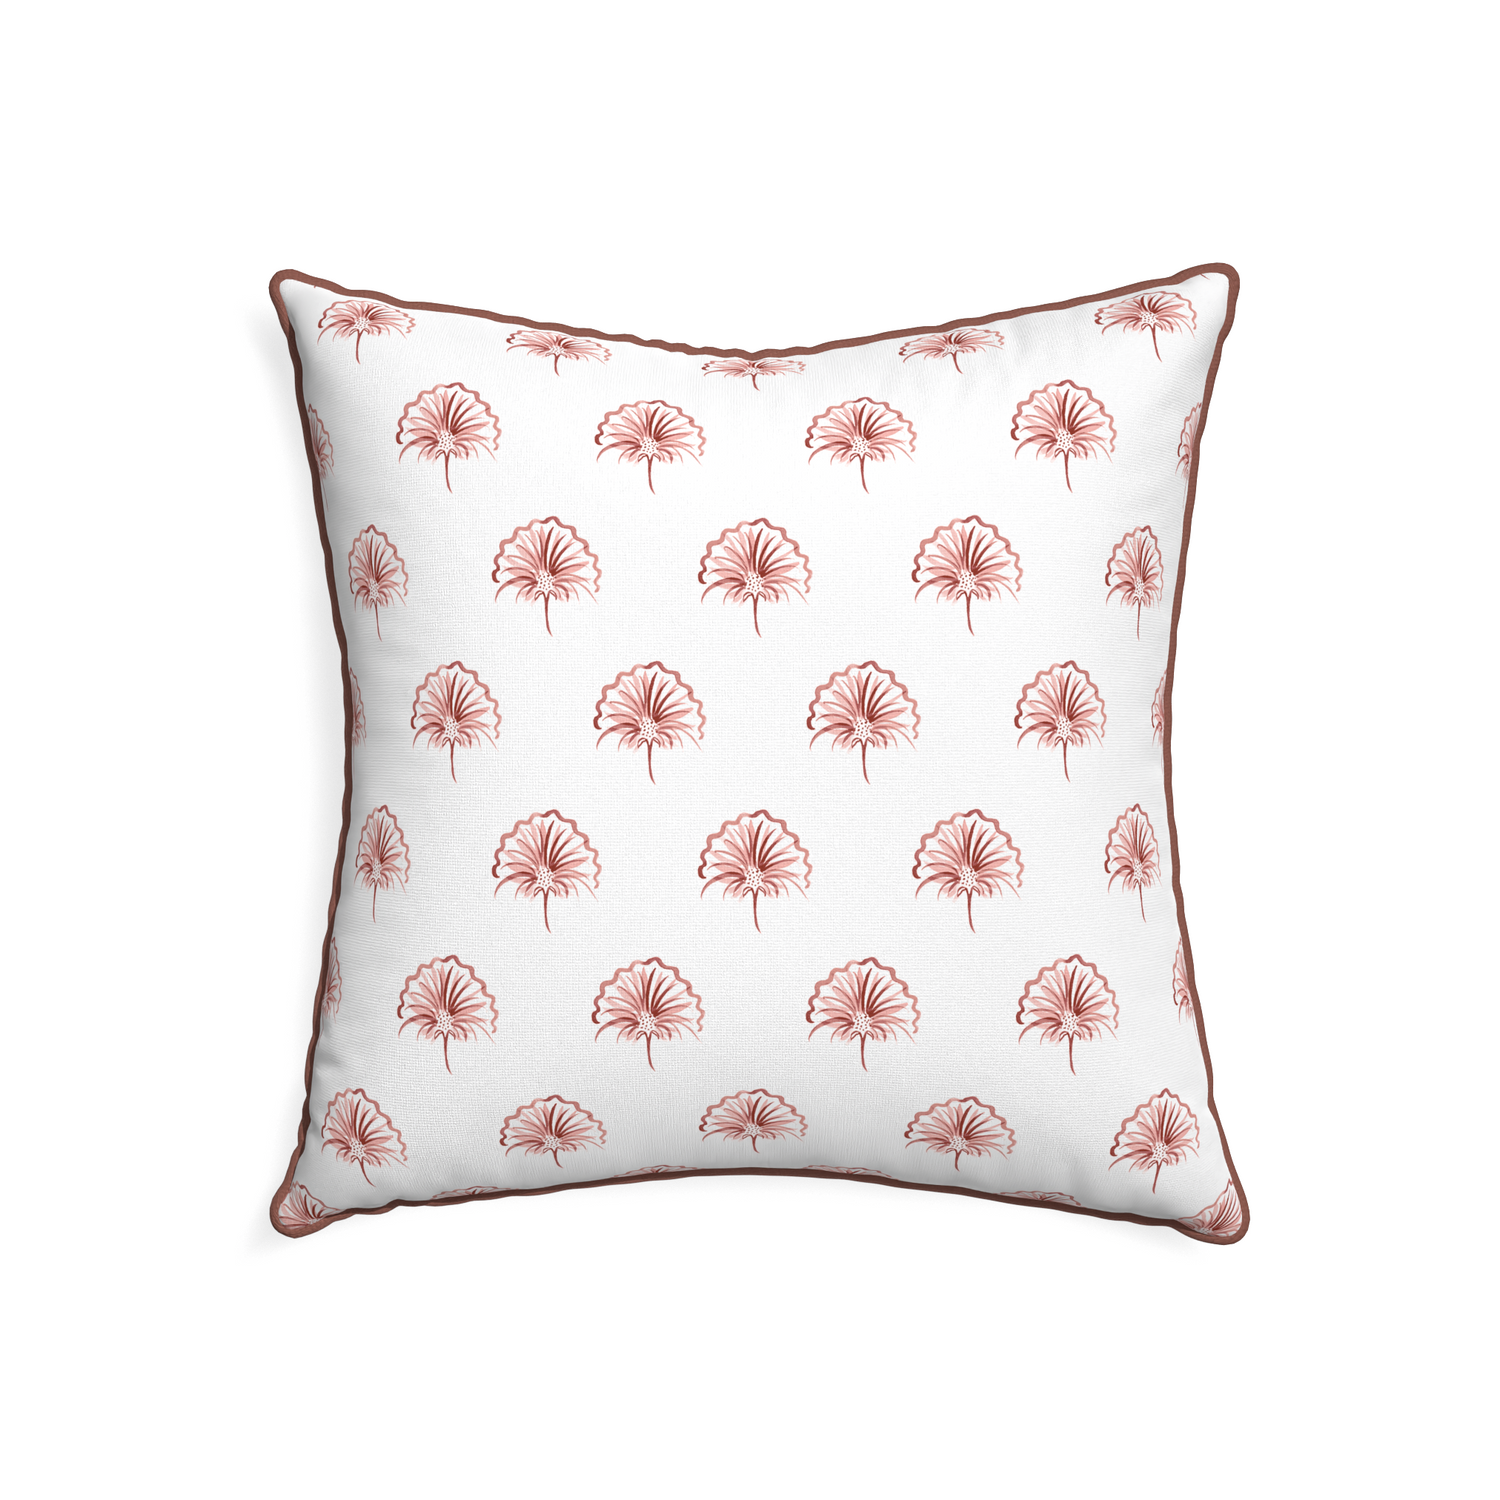 22-square penelope rose custom floral pinkpillow with w piping on white background